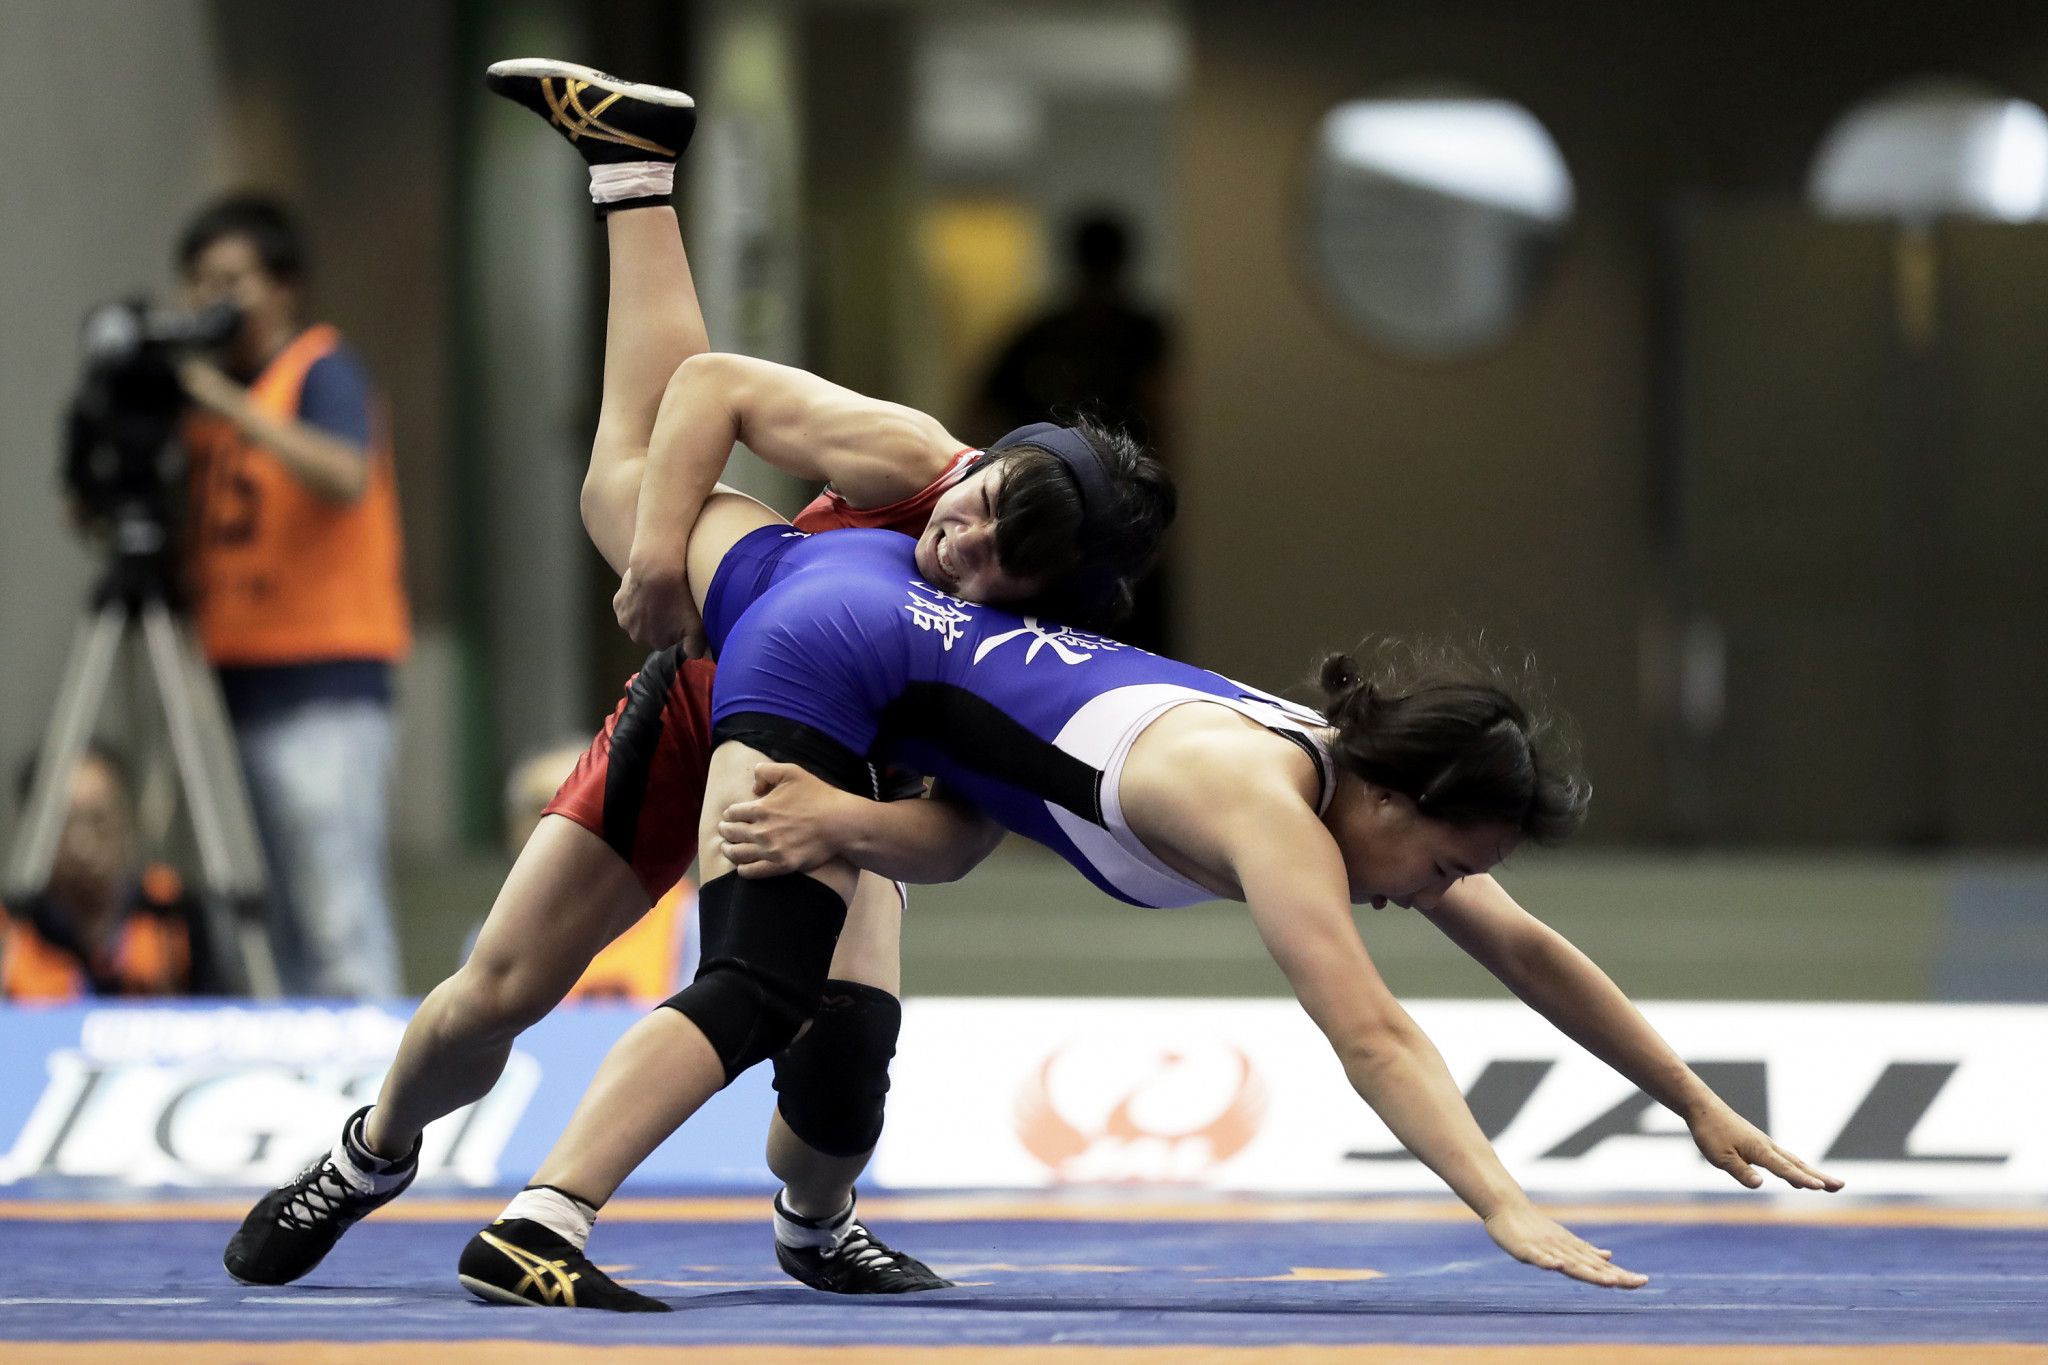 Imai clinches victory at Tokyo 2020 wrestling test event